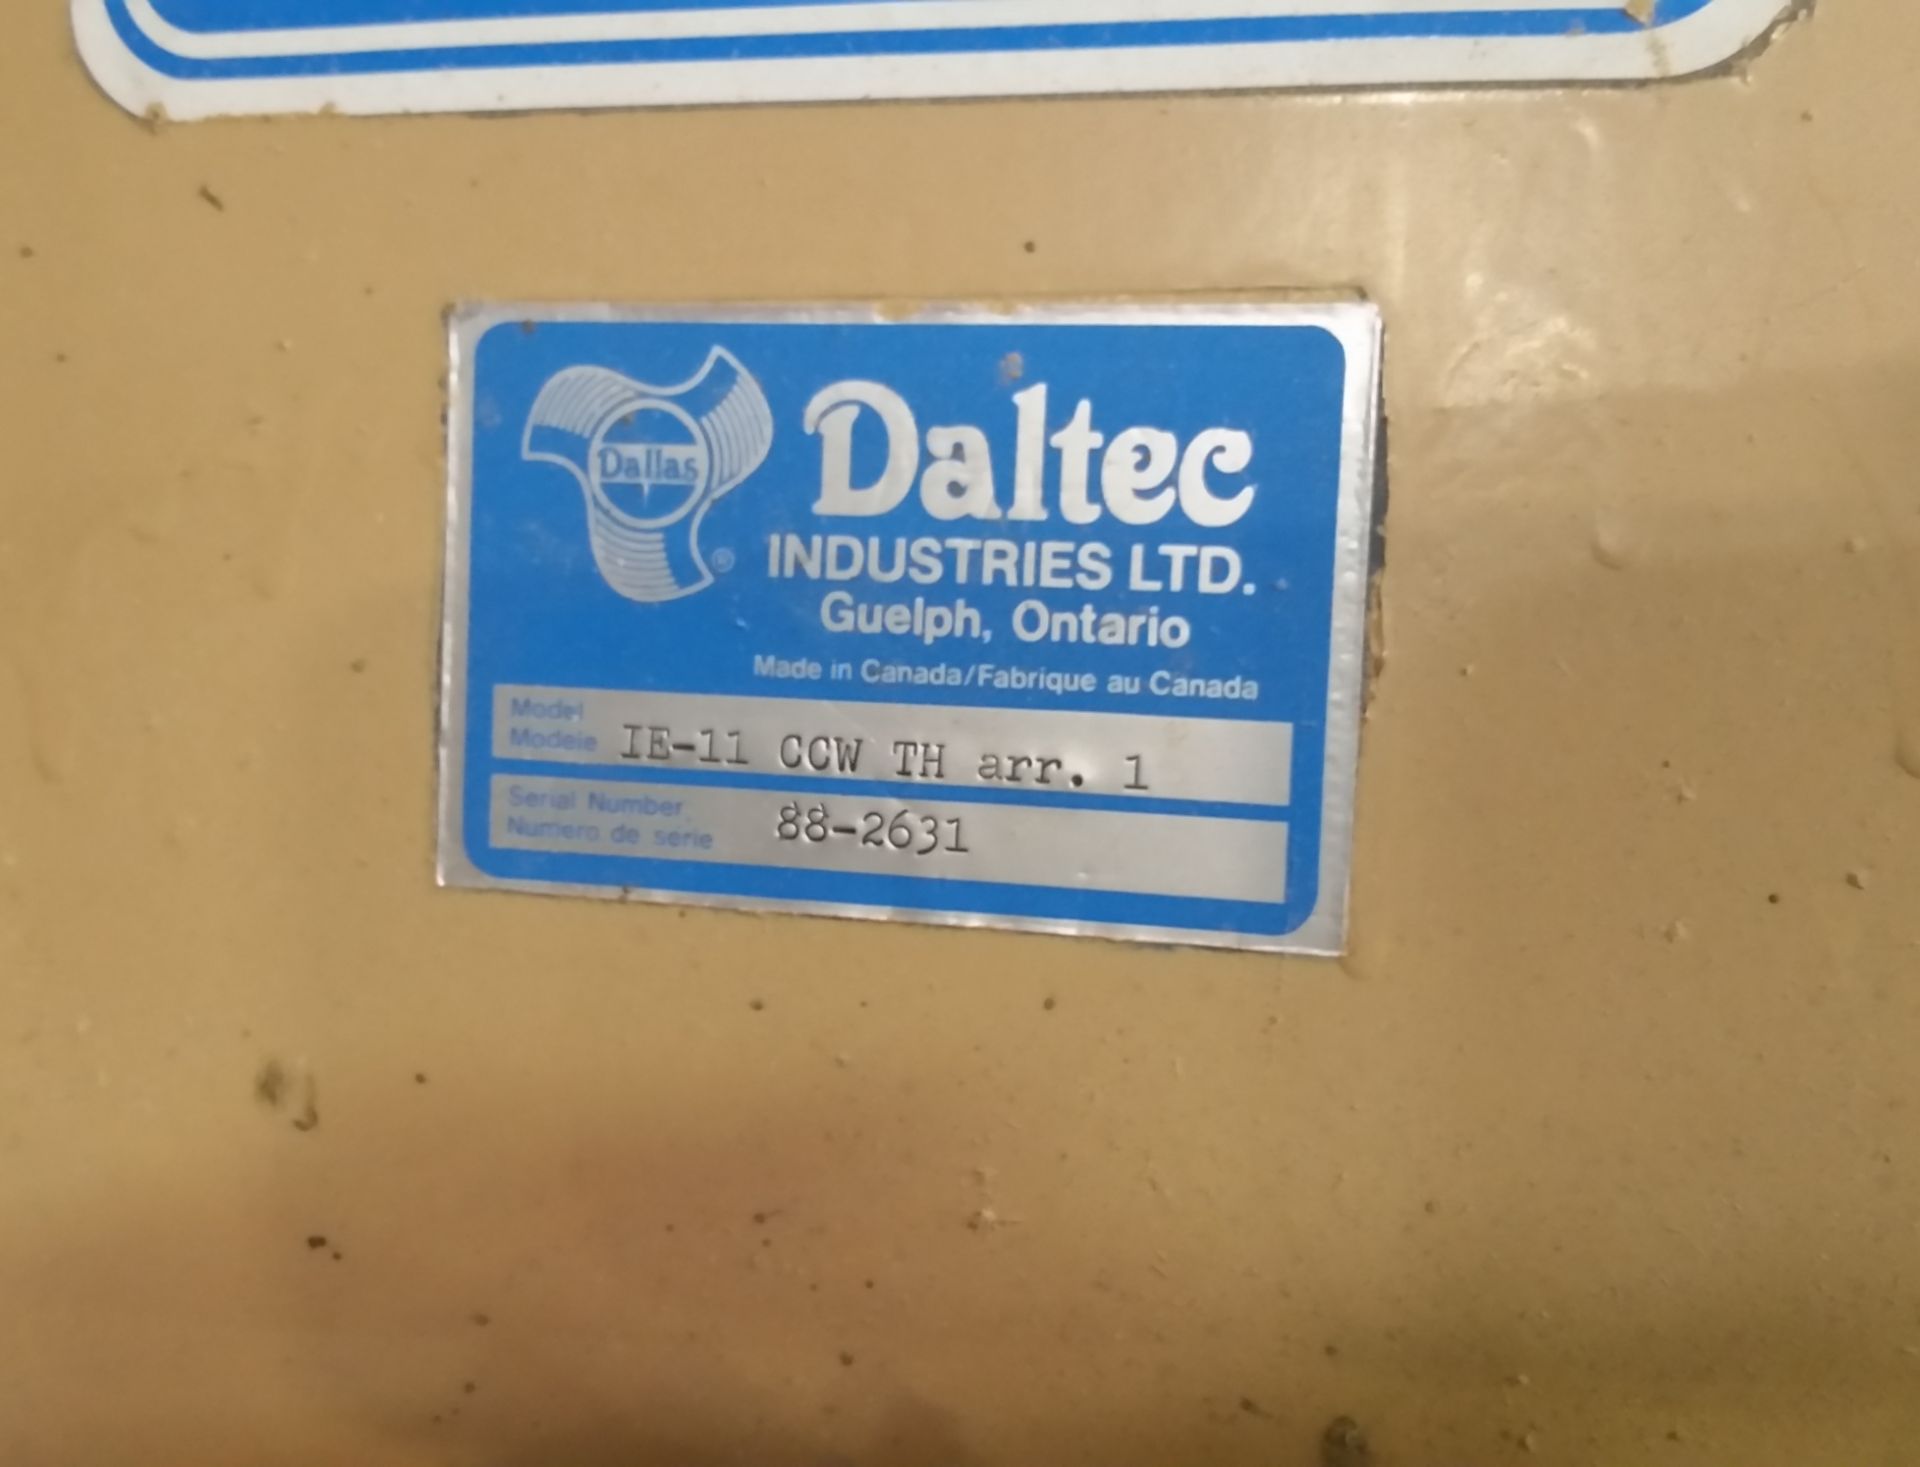 DALTECH IE-11 CCW 10 HP BLOWER S/N: 88-2631 - Image 2 of 2